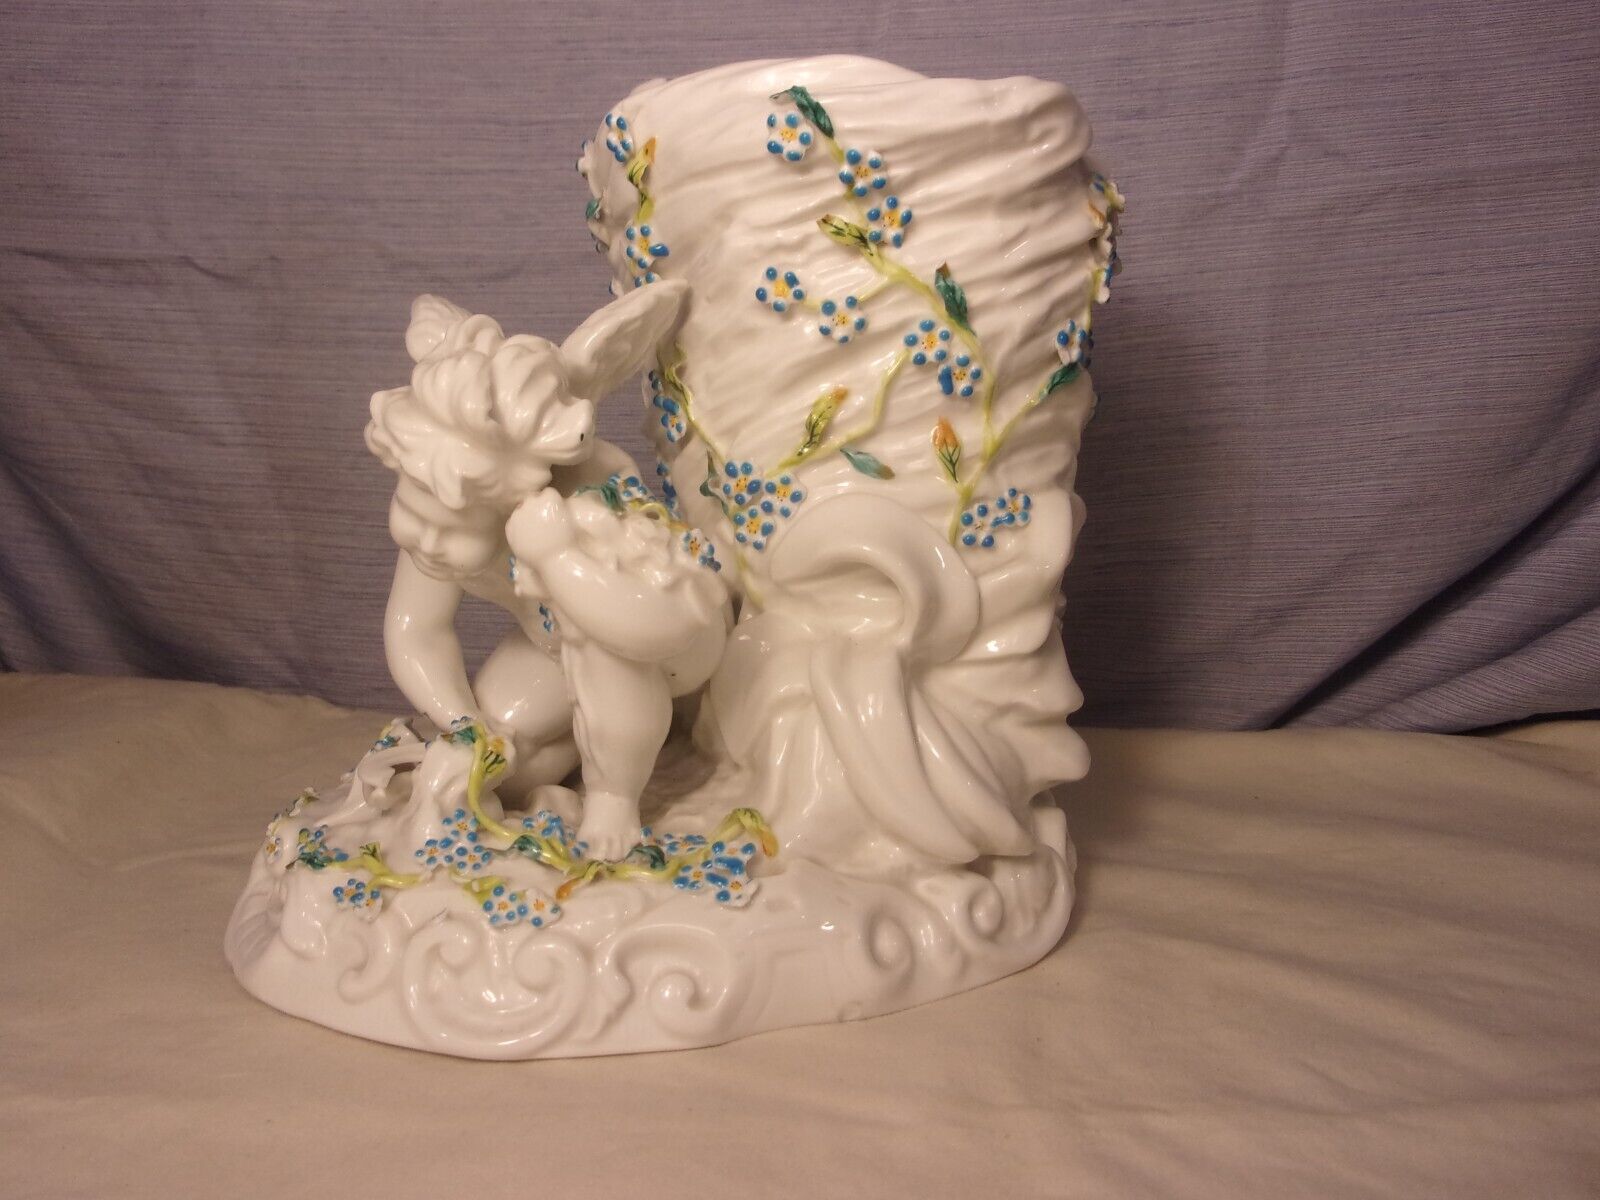 ANTIQUE 19TH C. EARLY FRENCH PORCELAIN VASE WITH PUTTI ANGEL LIMOGES? SEVRES?